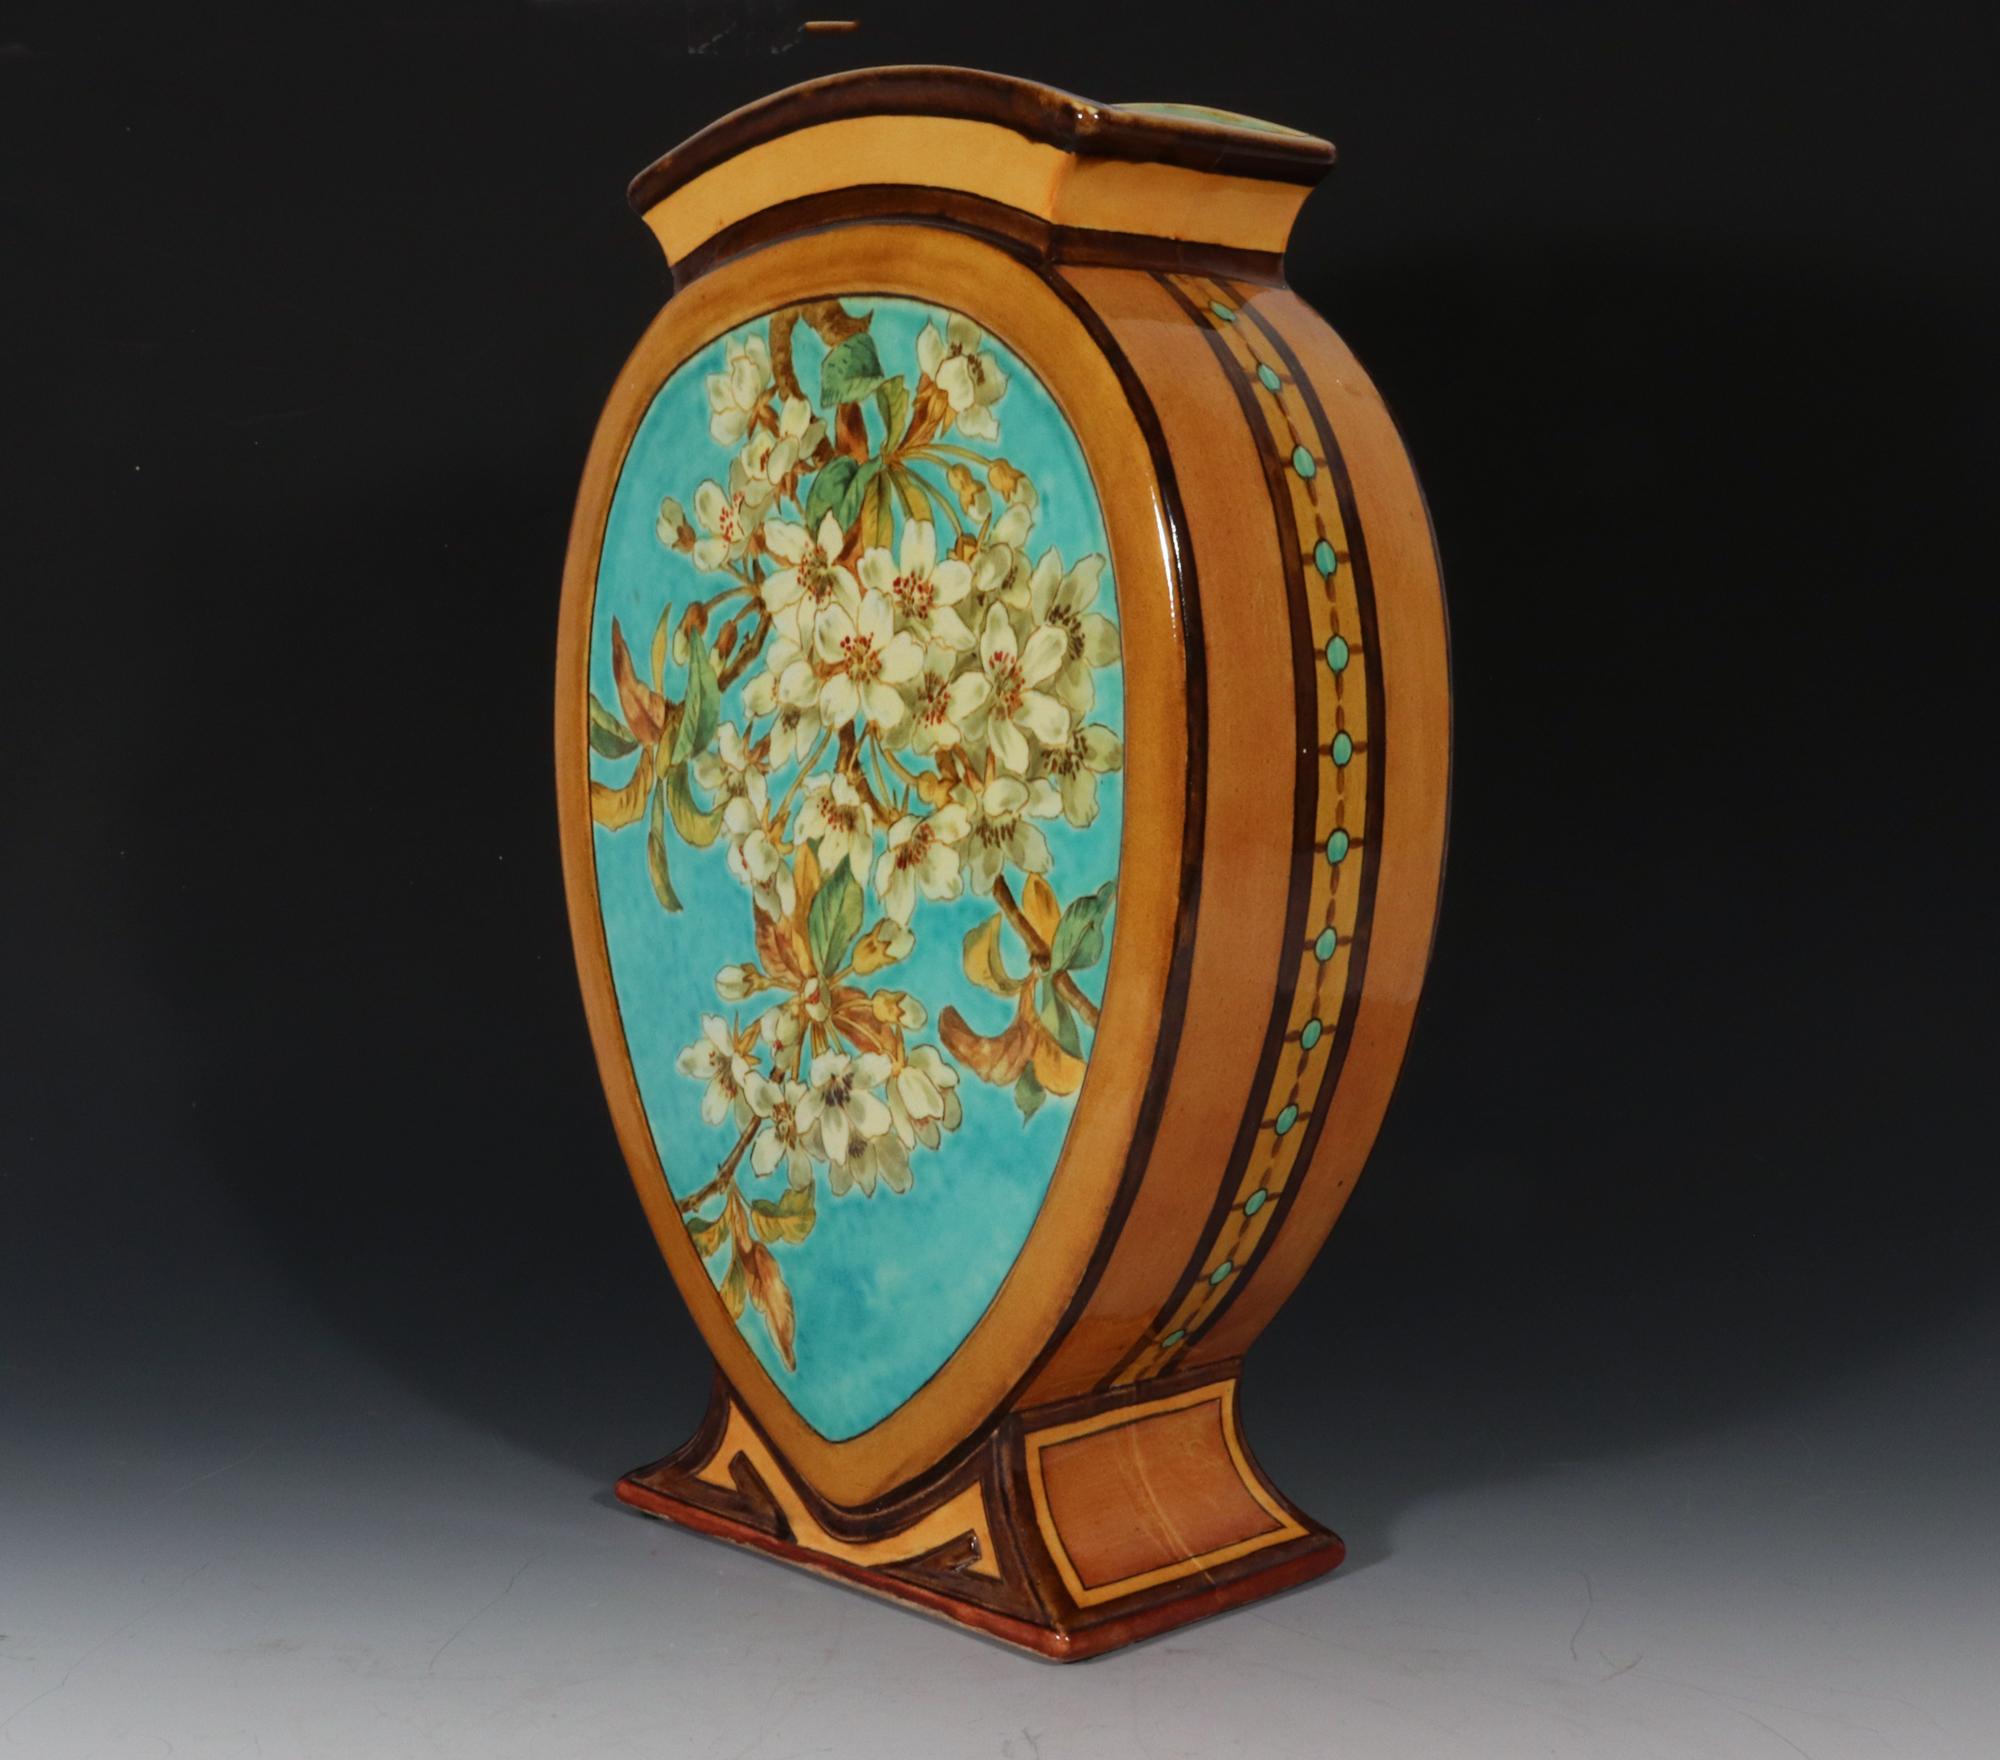 Victorian Doulton Faience Shaped Botanical Pottery Vase Signed by Artist Mary M Arding For Sale